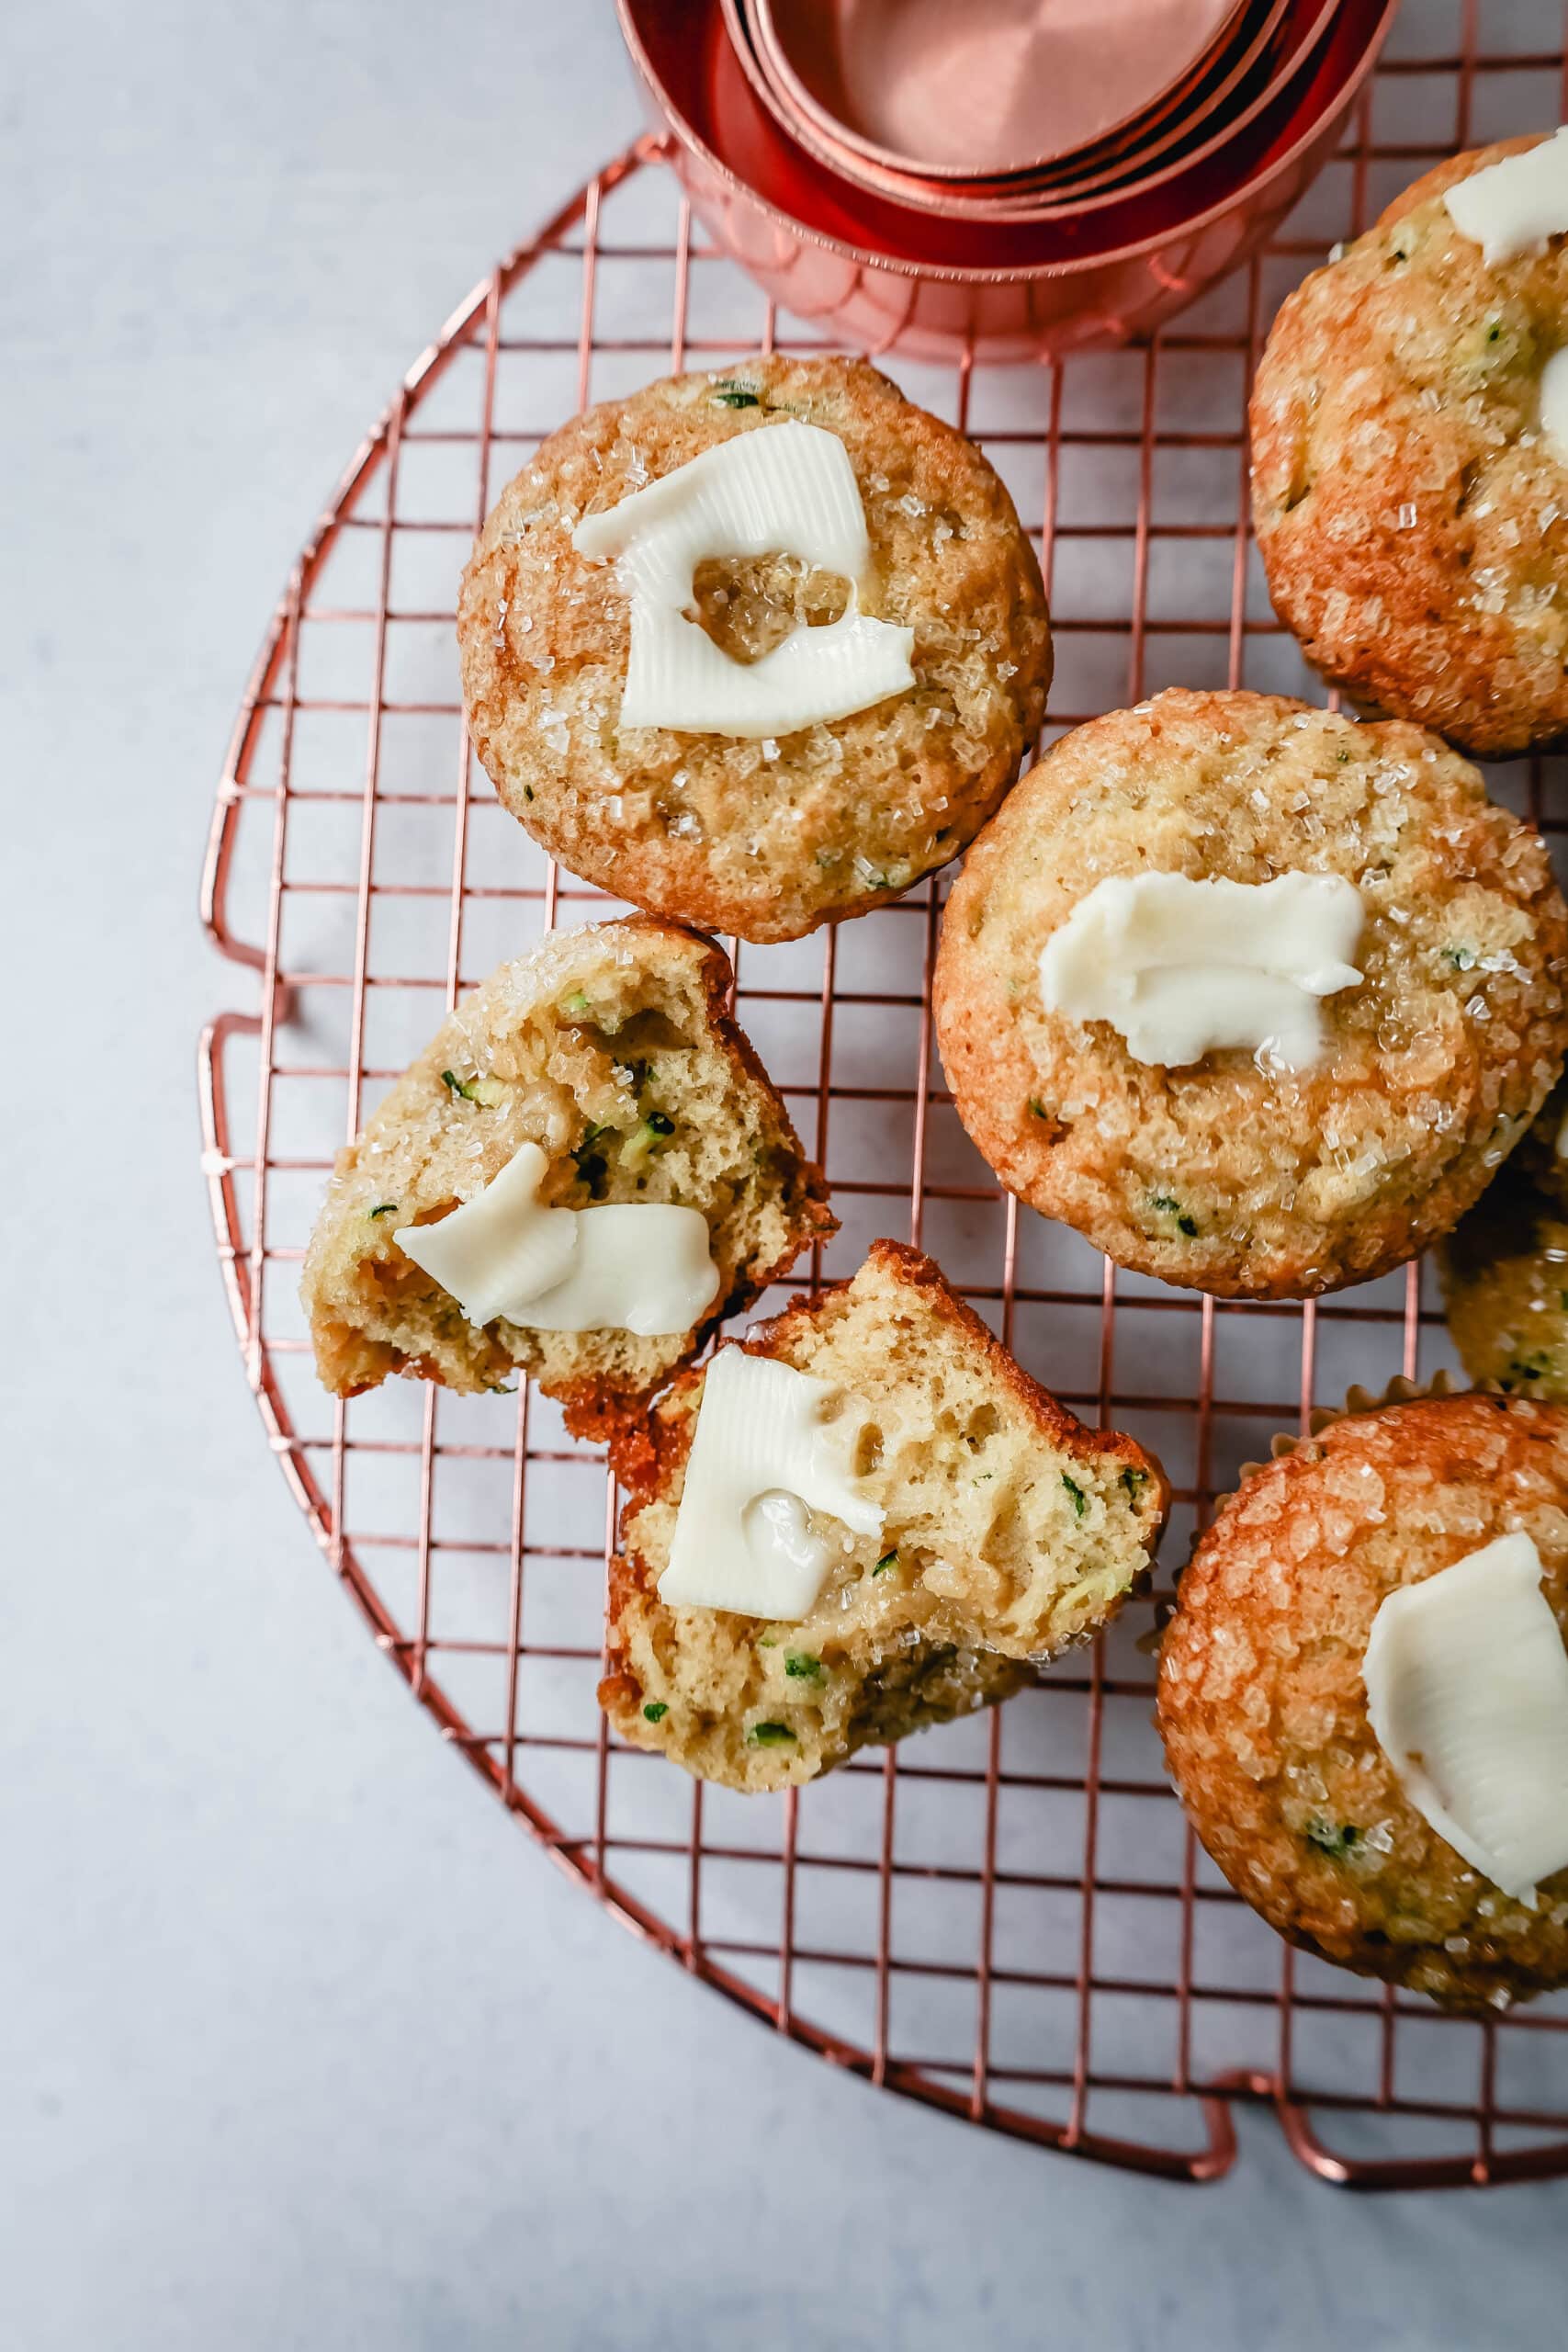 The best zucchini muffins are made with fresh zucchini which makes the muffins moister!  You won't even know there's zucchini in these muffins because they taste so good.